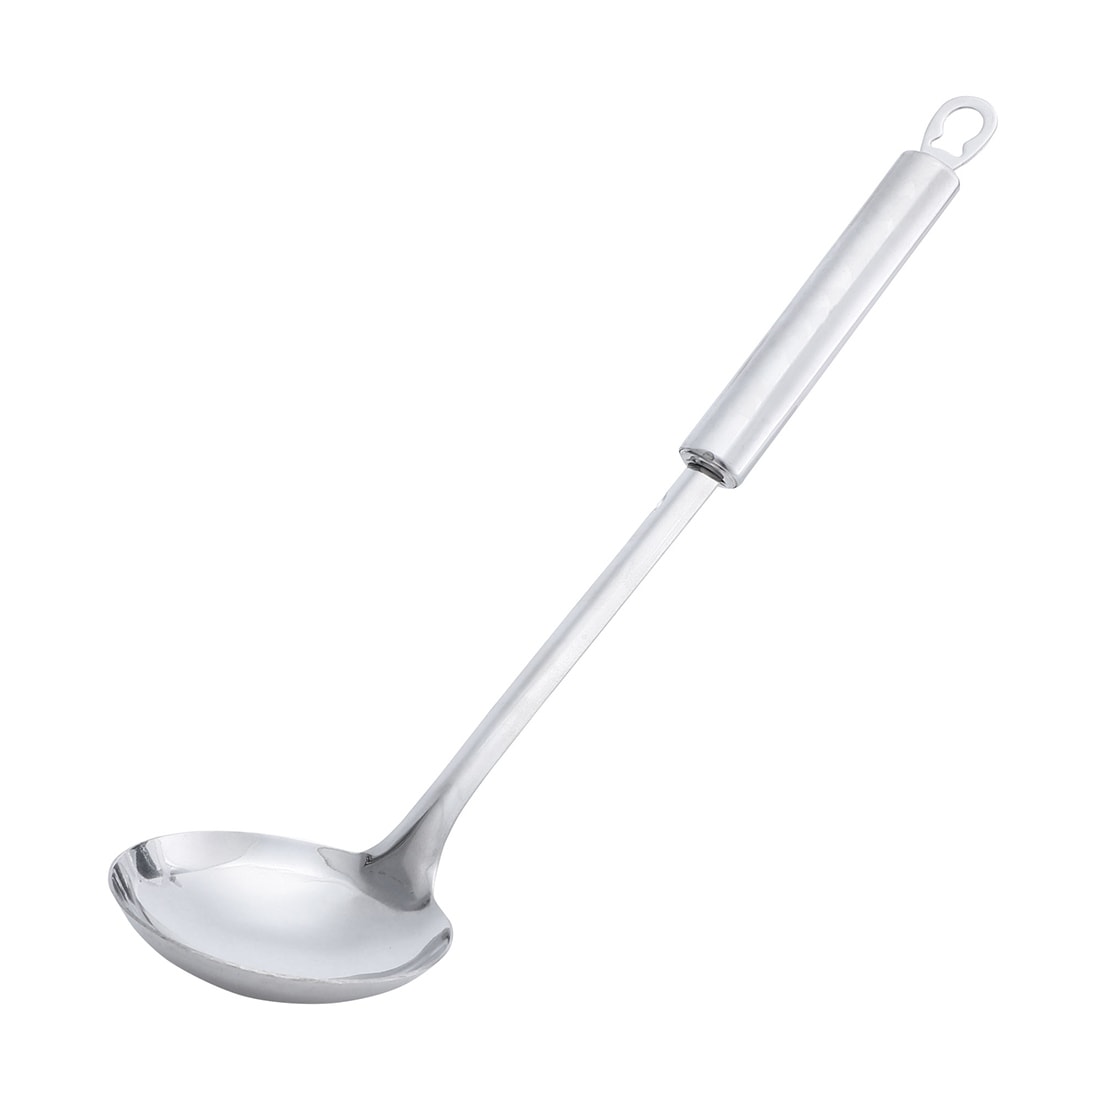 Large Silicone Ladles Soup Spoons, Heatproof Skimmer Strainer Slotted  Spoon,Non-Stick Cooking Silicone Scoop for